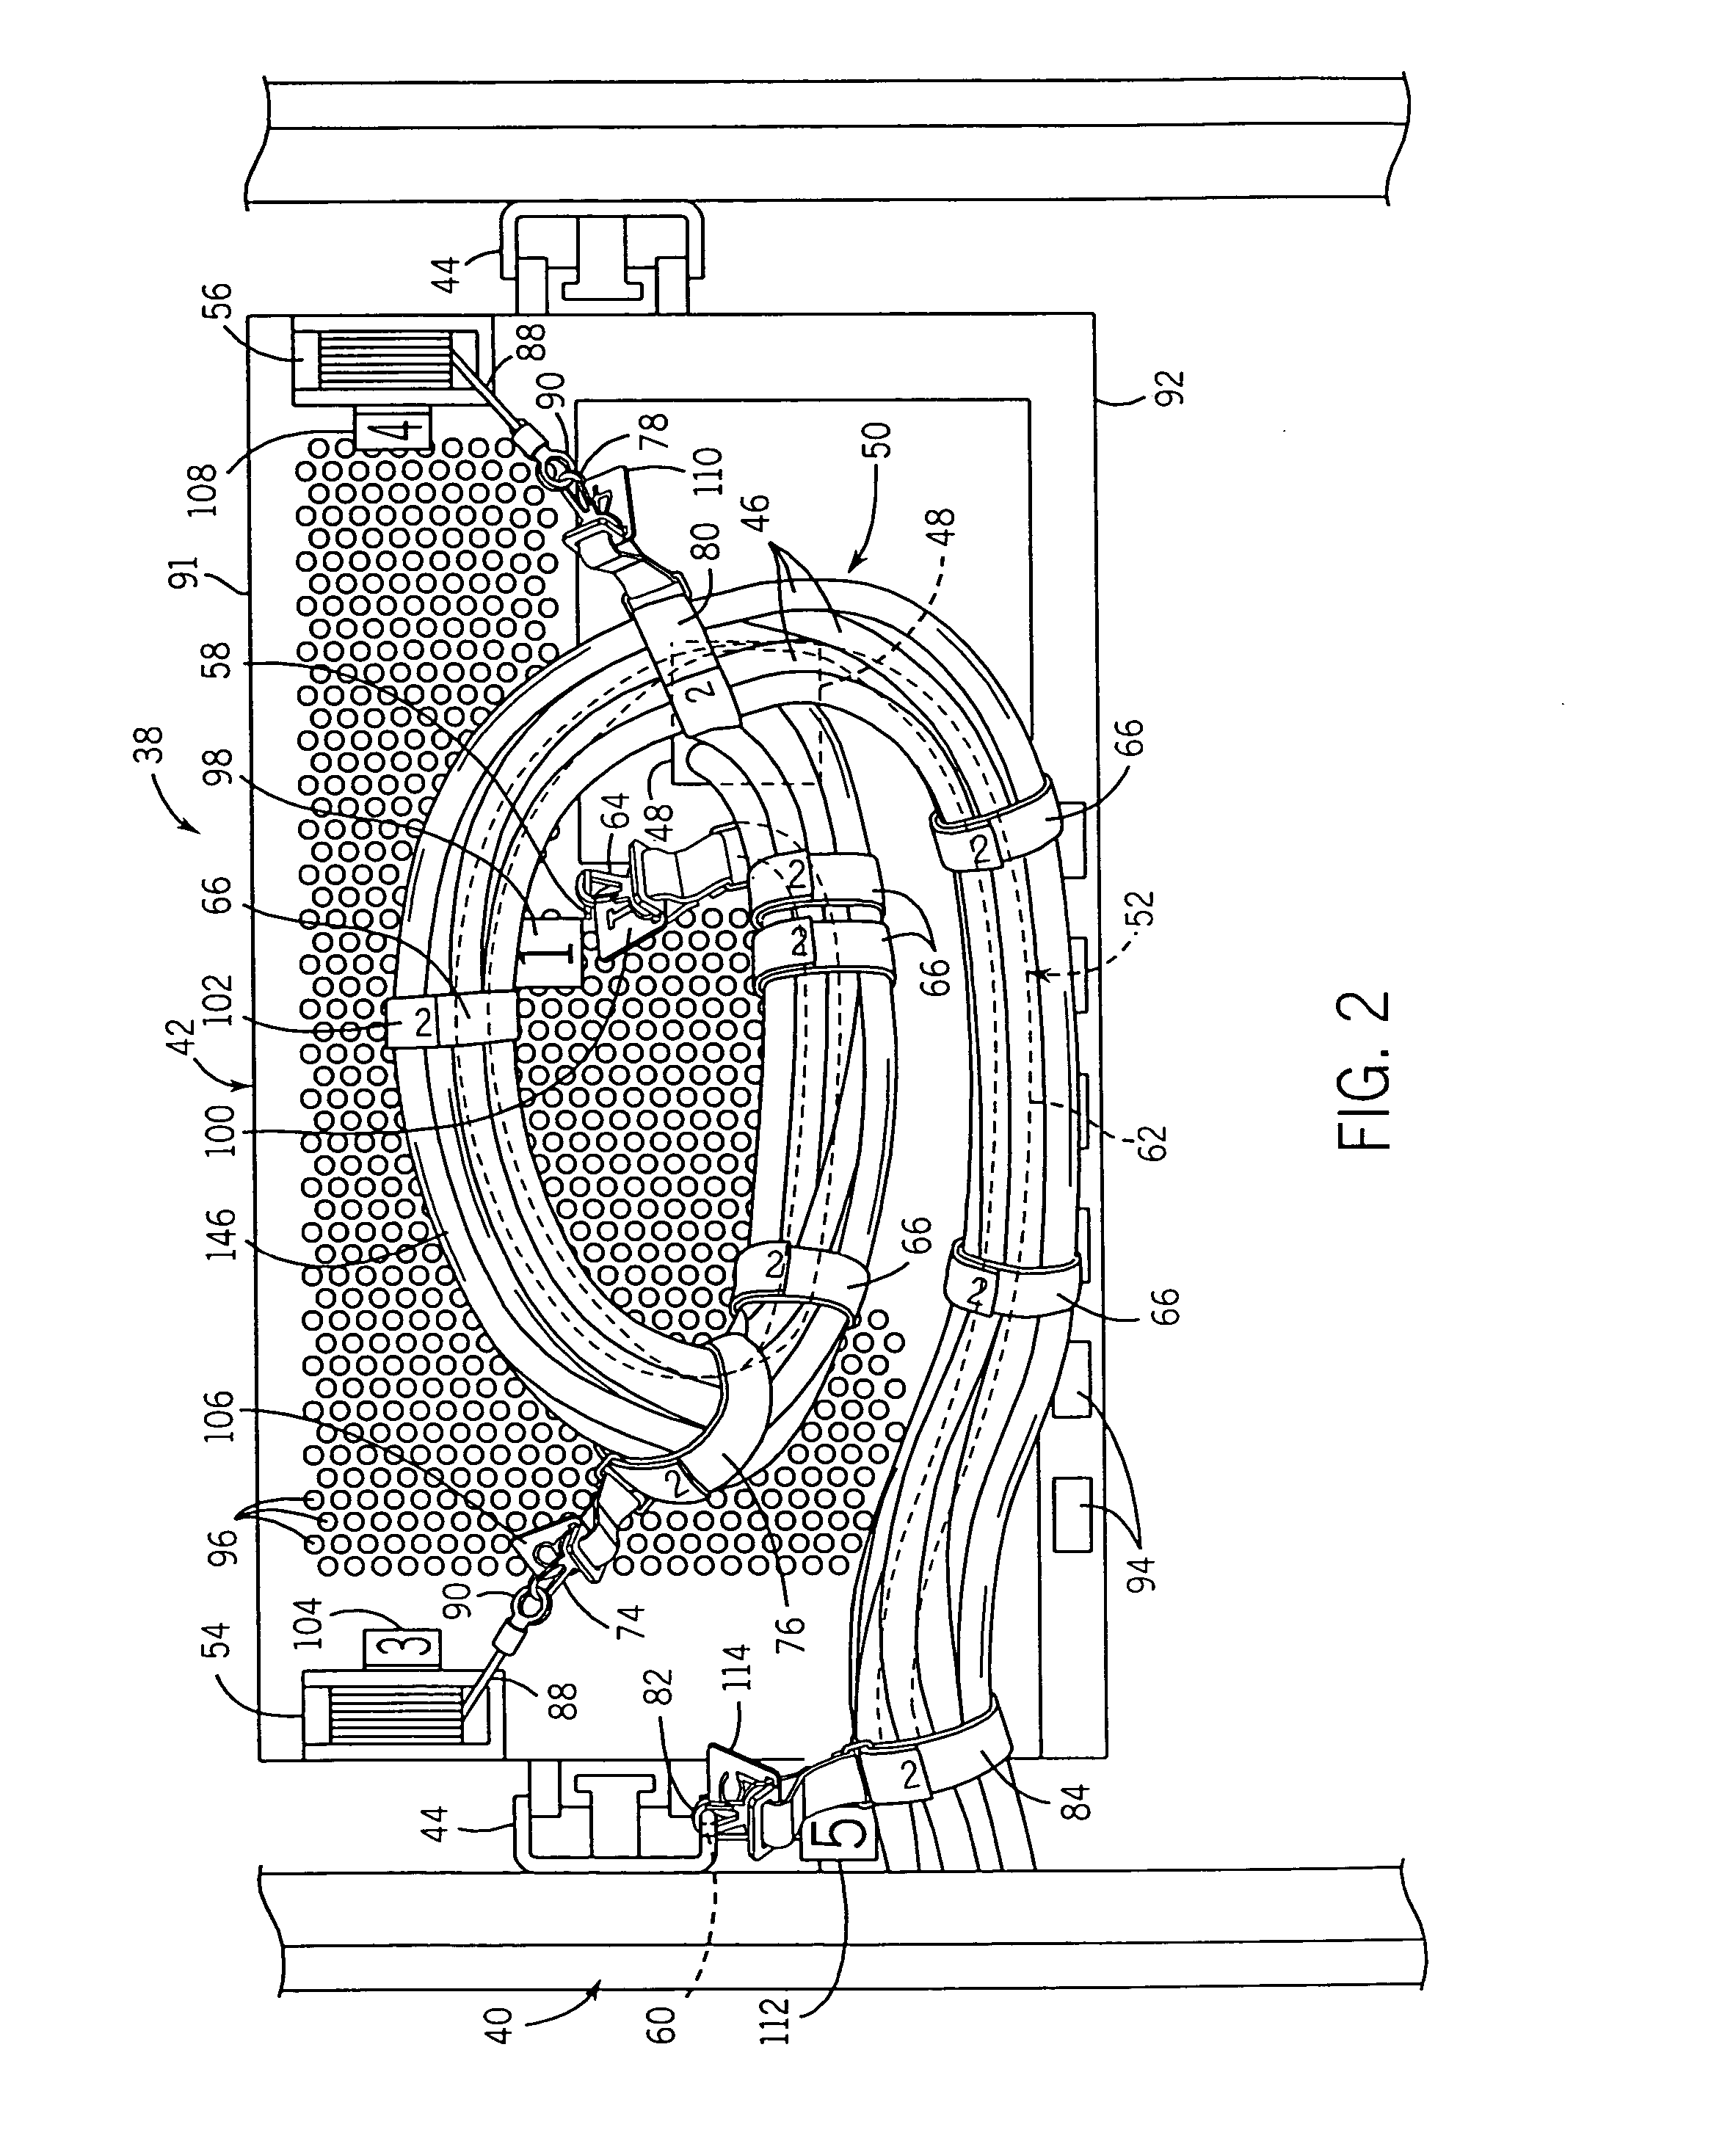 Cable management system and method of installation and operation thereof